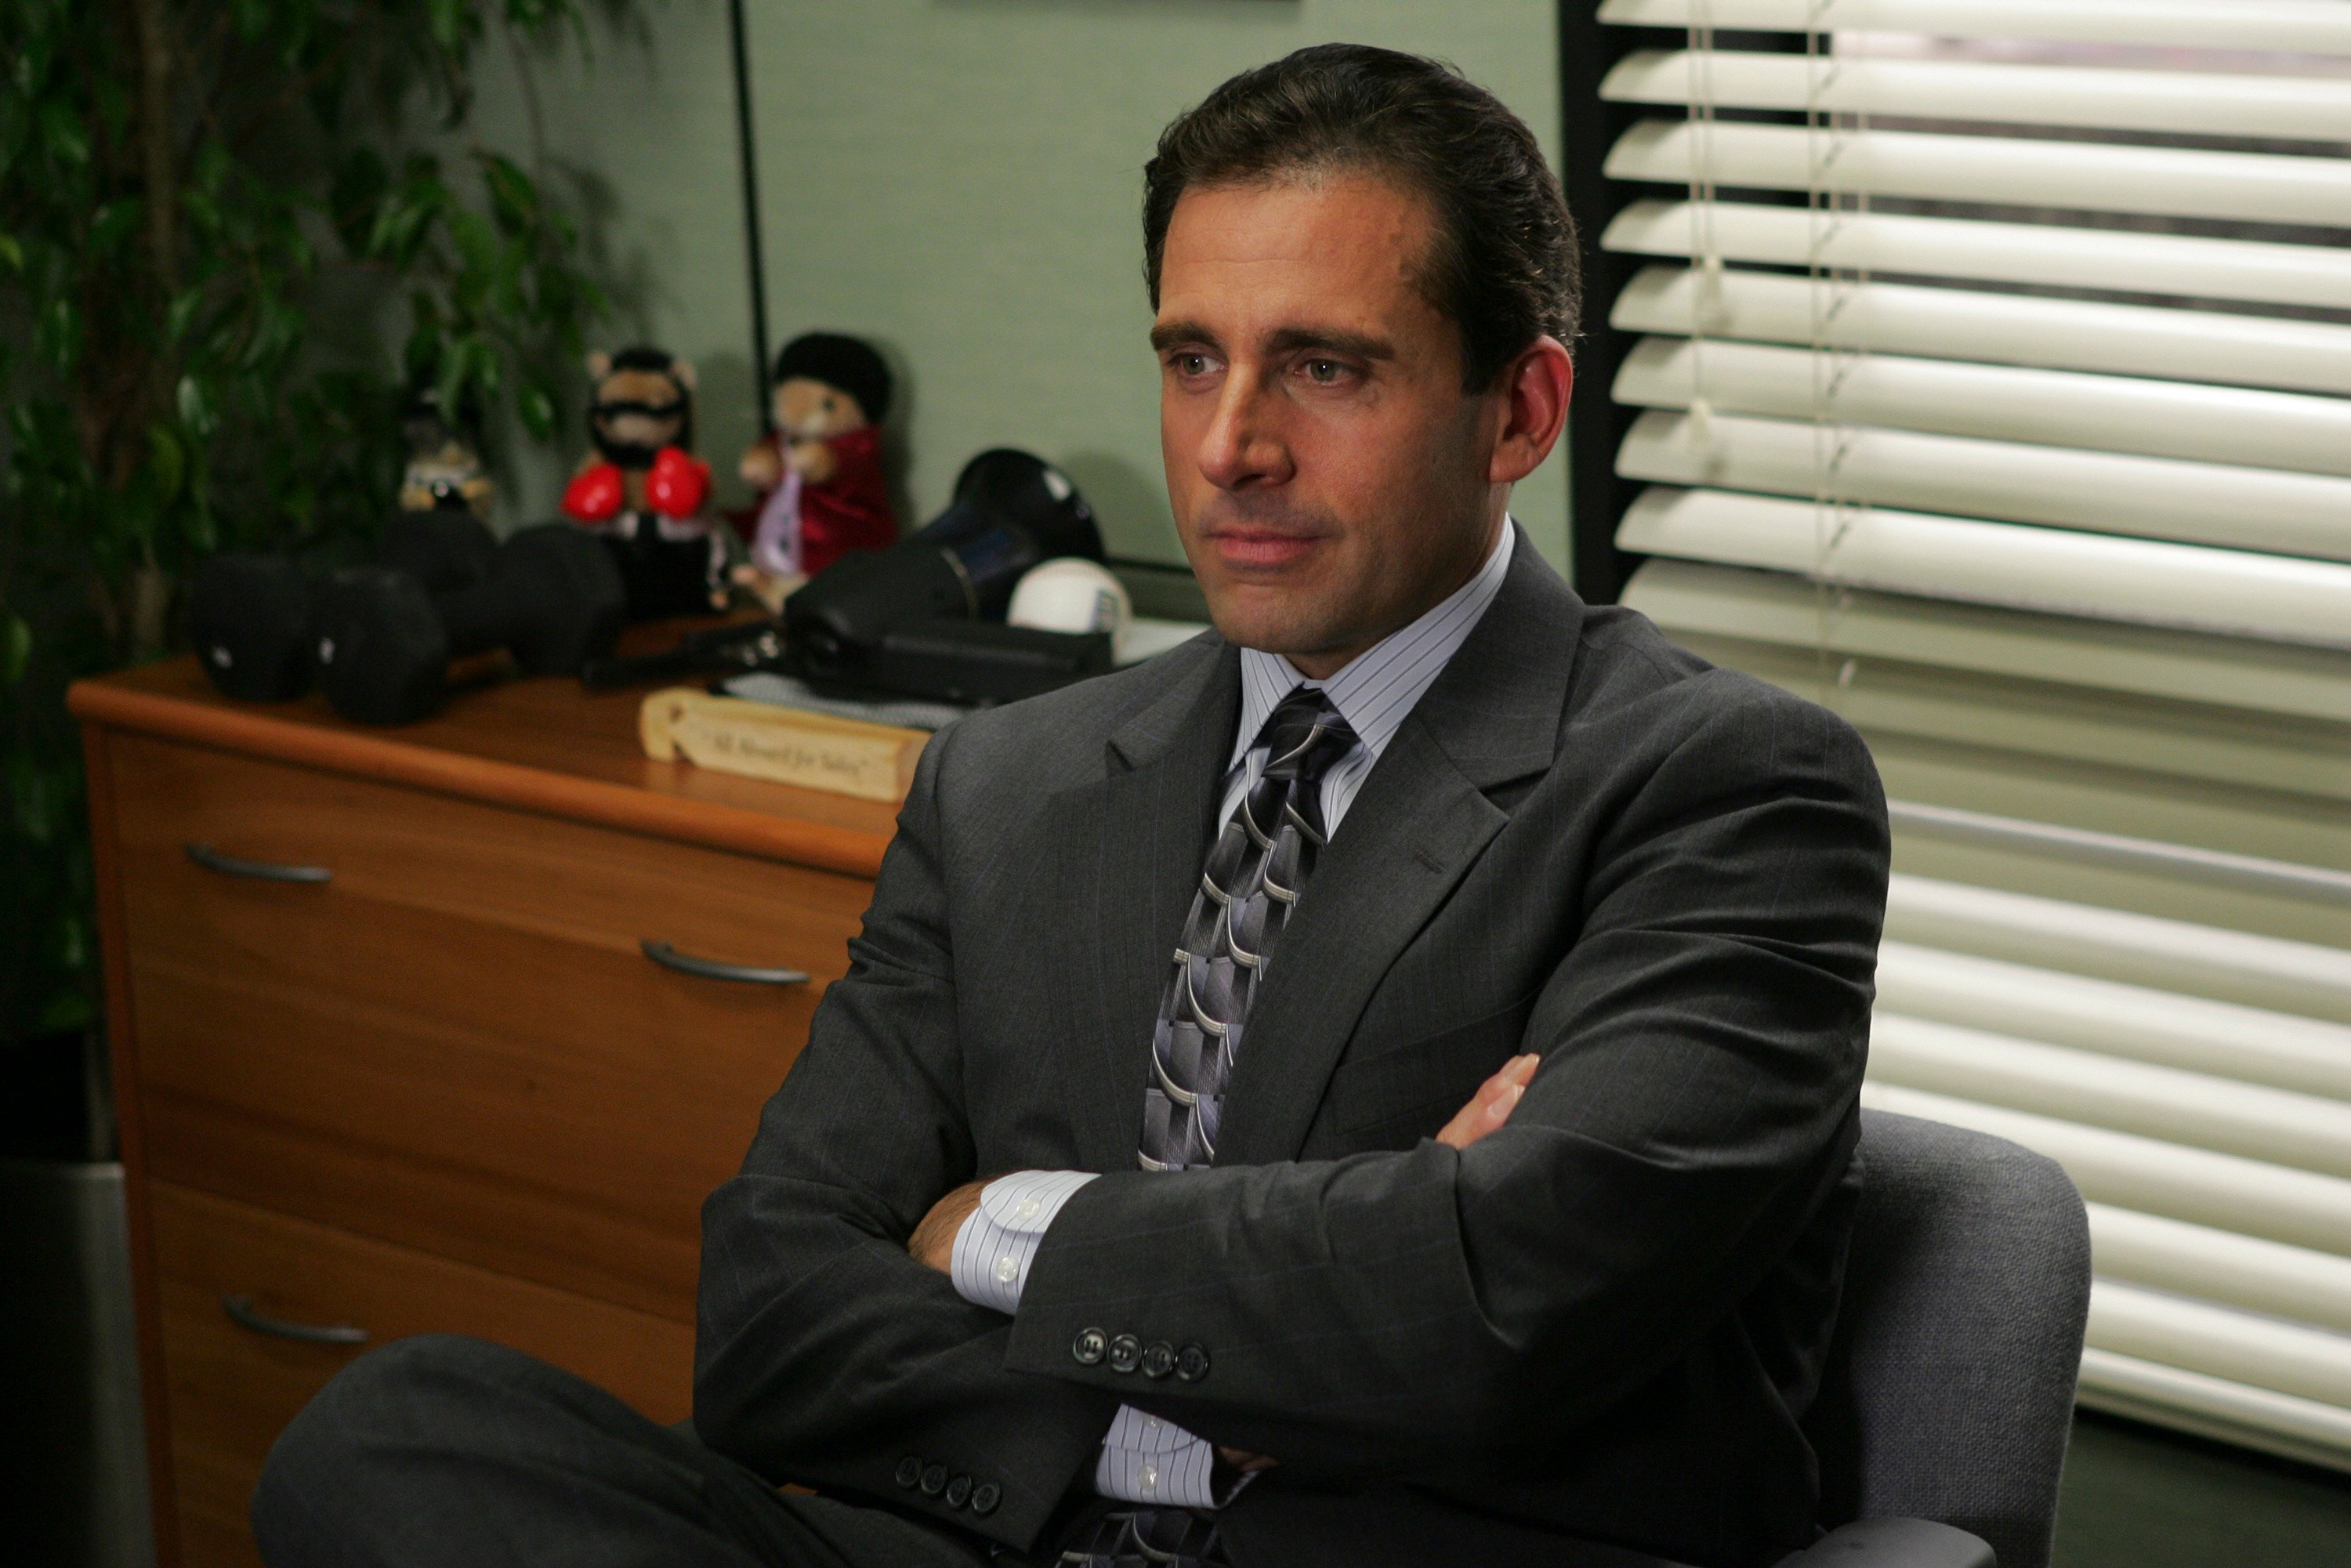 ‘The Office’: 17 Best Michael Scott Quotes That Made Us Fall in Love With the Character